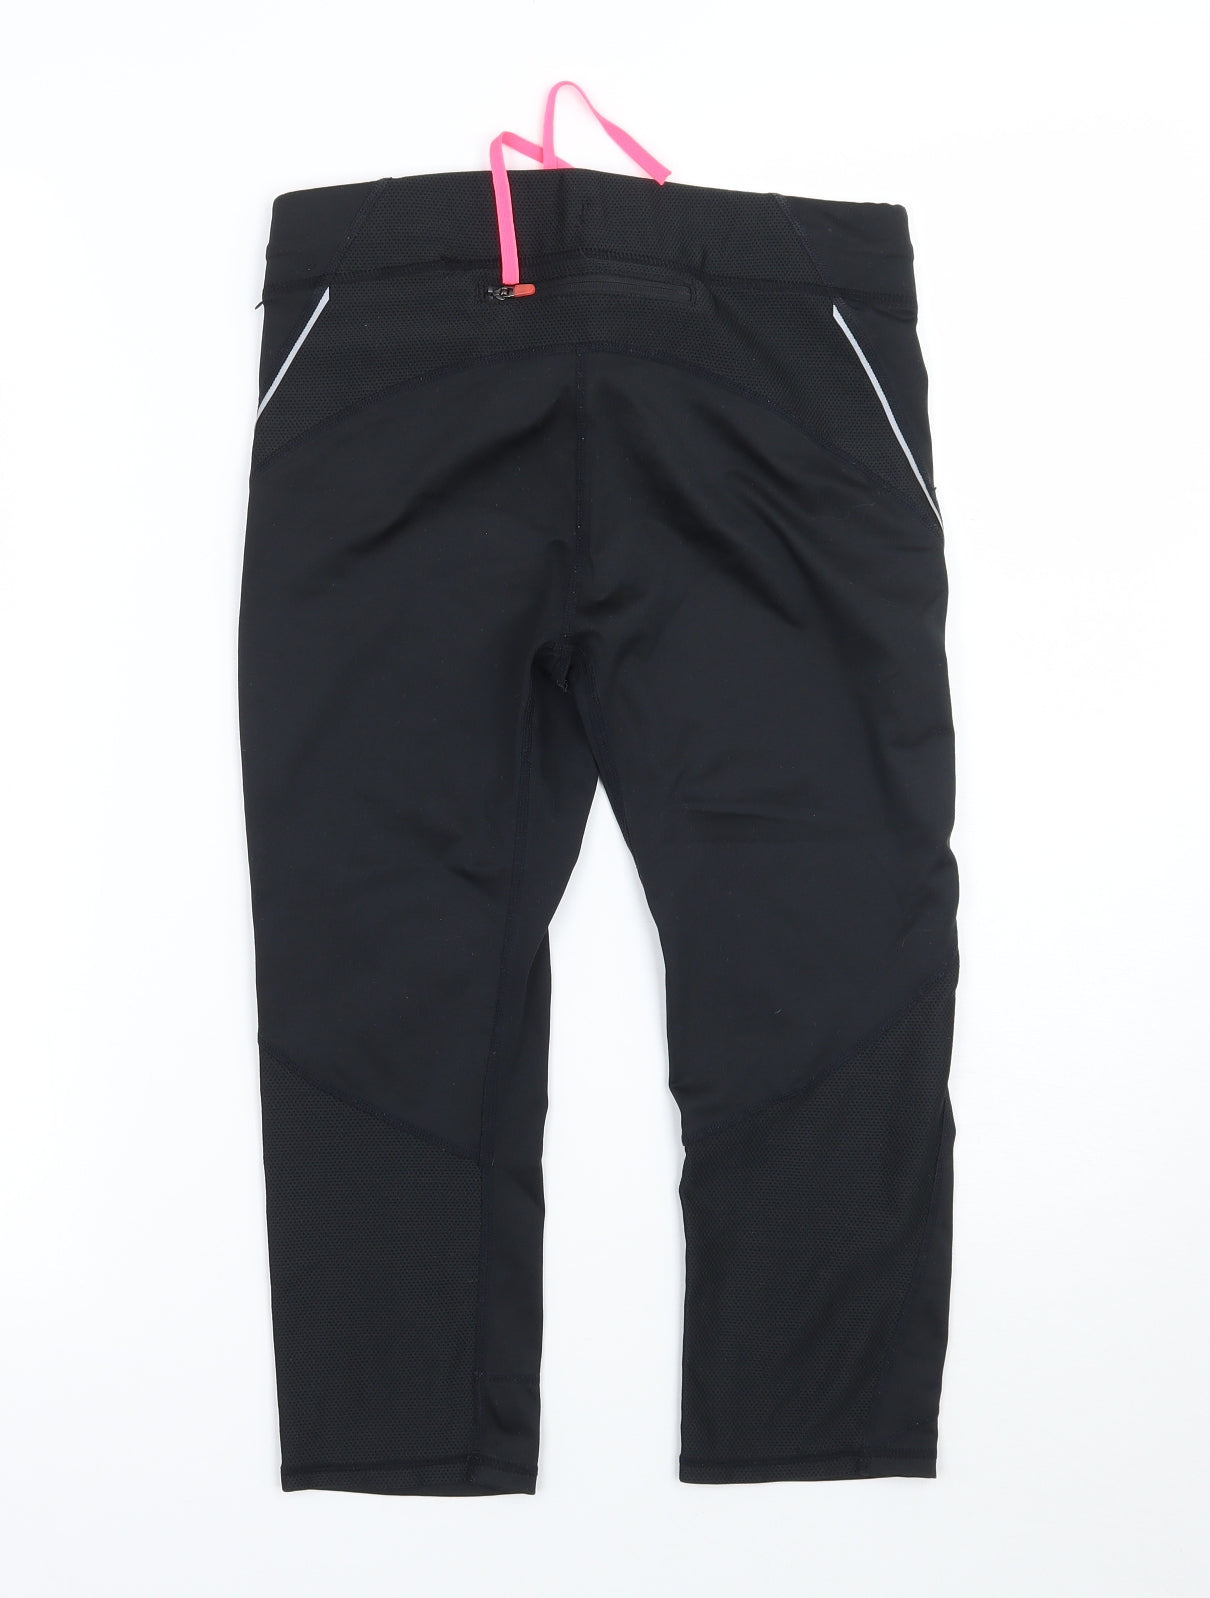 Work out Womens Black   Cropped Leggings Size S